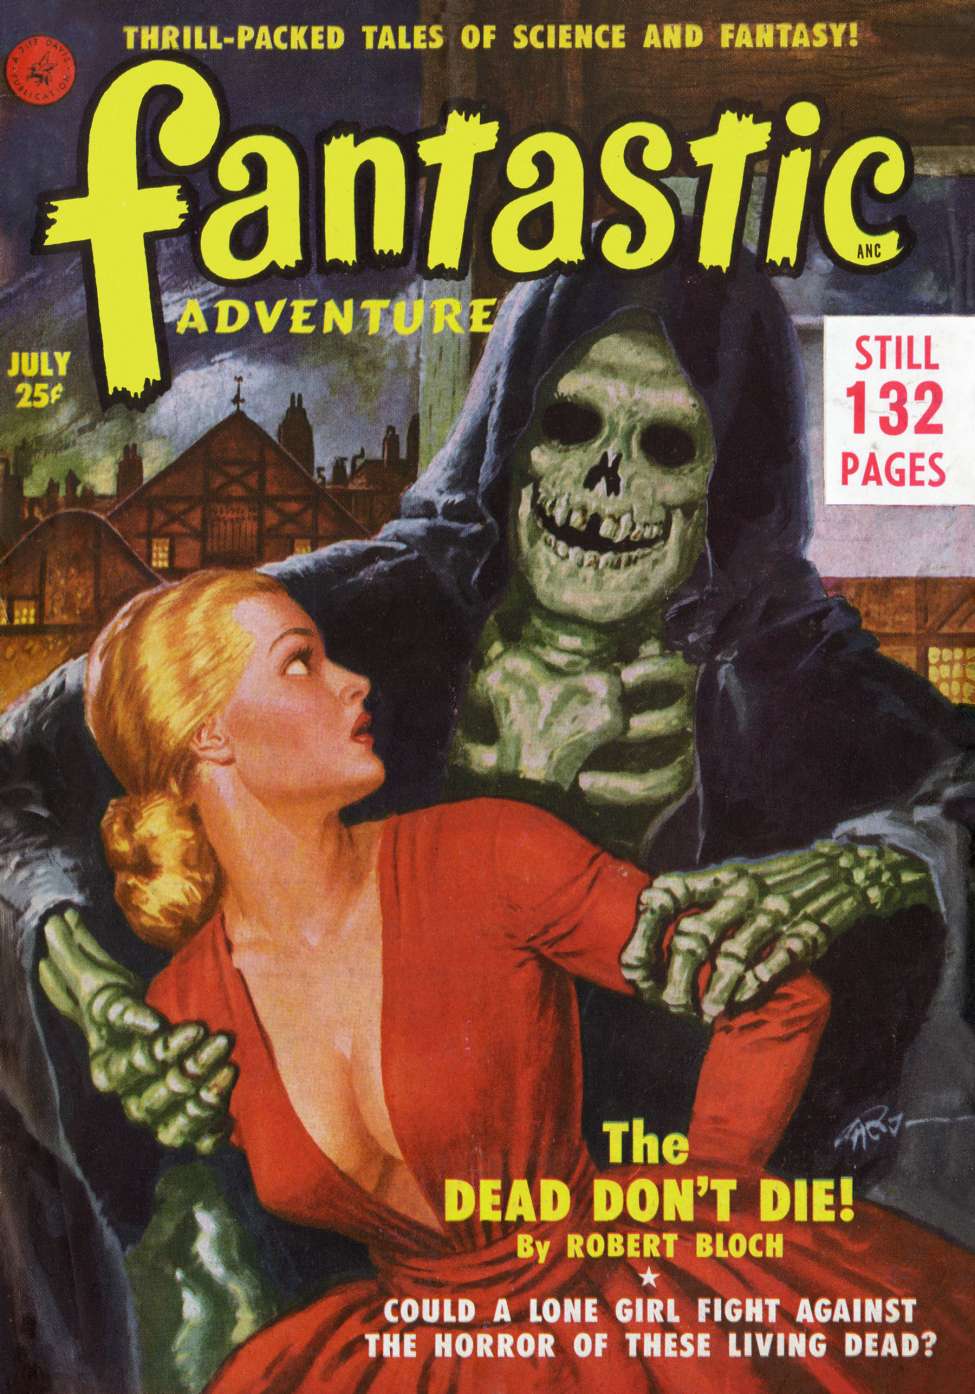 Comic Book Cover For Fantastic Adventures v13 7 - The Dead Don't Die! - Robert Bloch